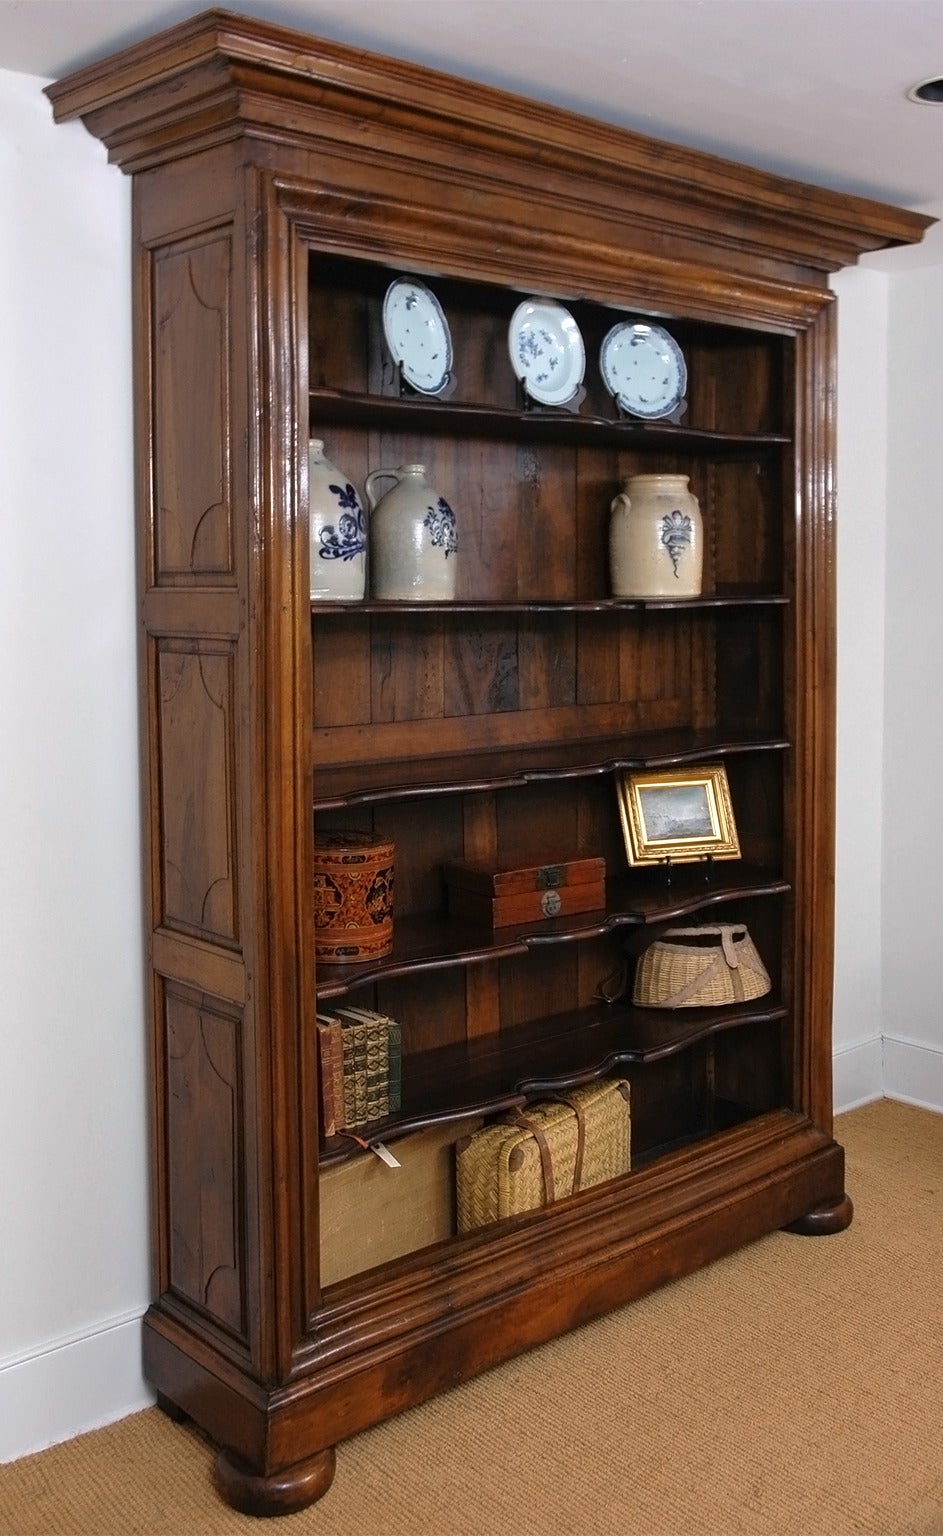 Originally an 18th century armoire from Brittany in walnut, this handsome piece was expertly modified to function as an open bookcase. An elaborate cornice along with pronounced moldings (where doors had once been) define the opening, with